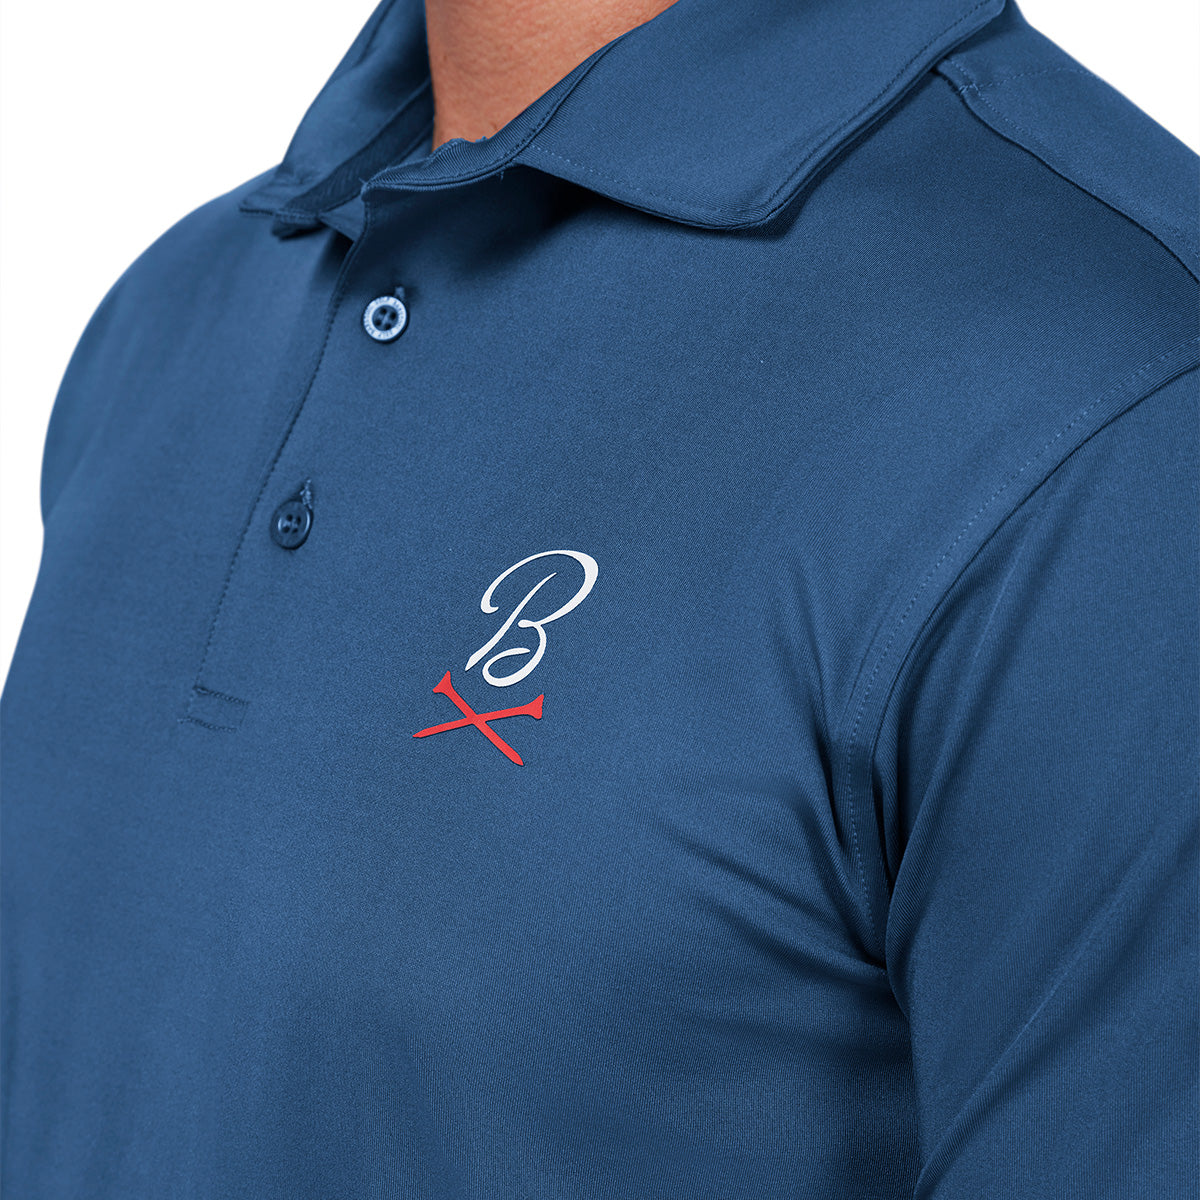 Barstool Golf Crossed Tees Solid Polo-Polos-Fore Play-Barstool Sports